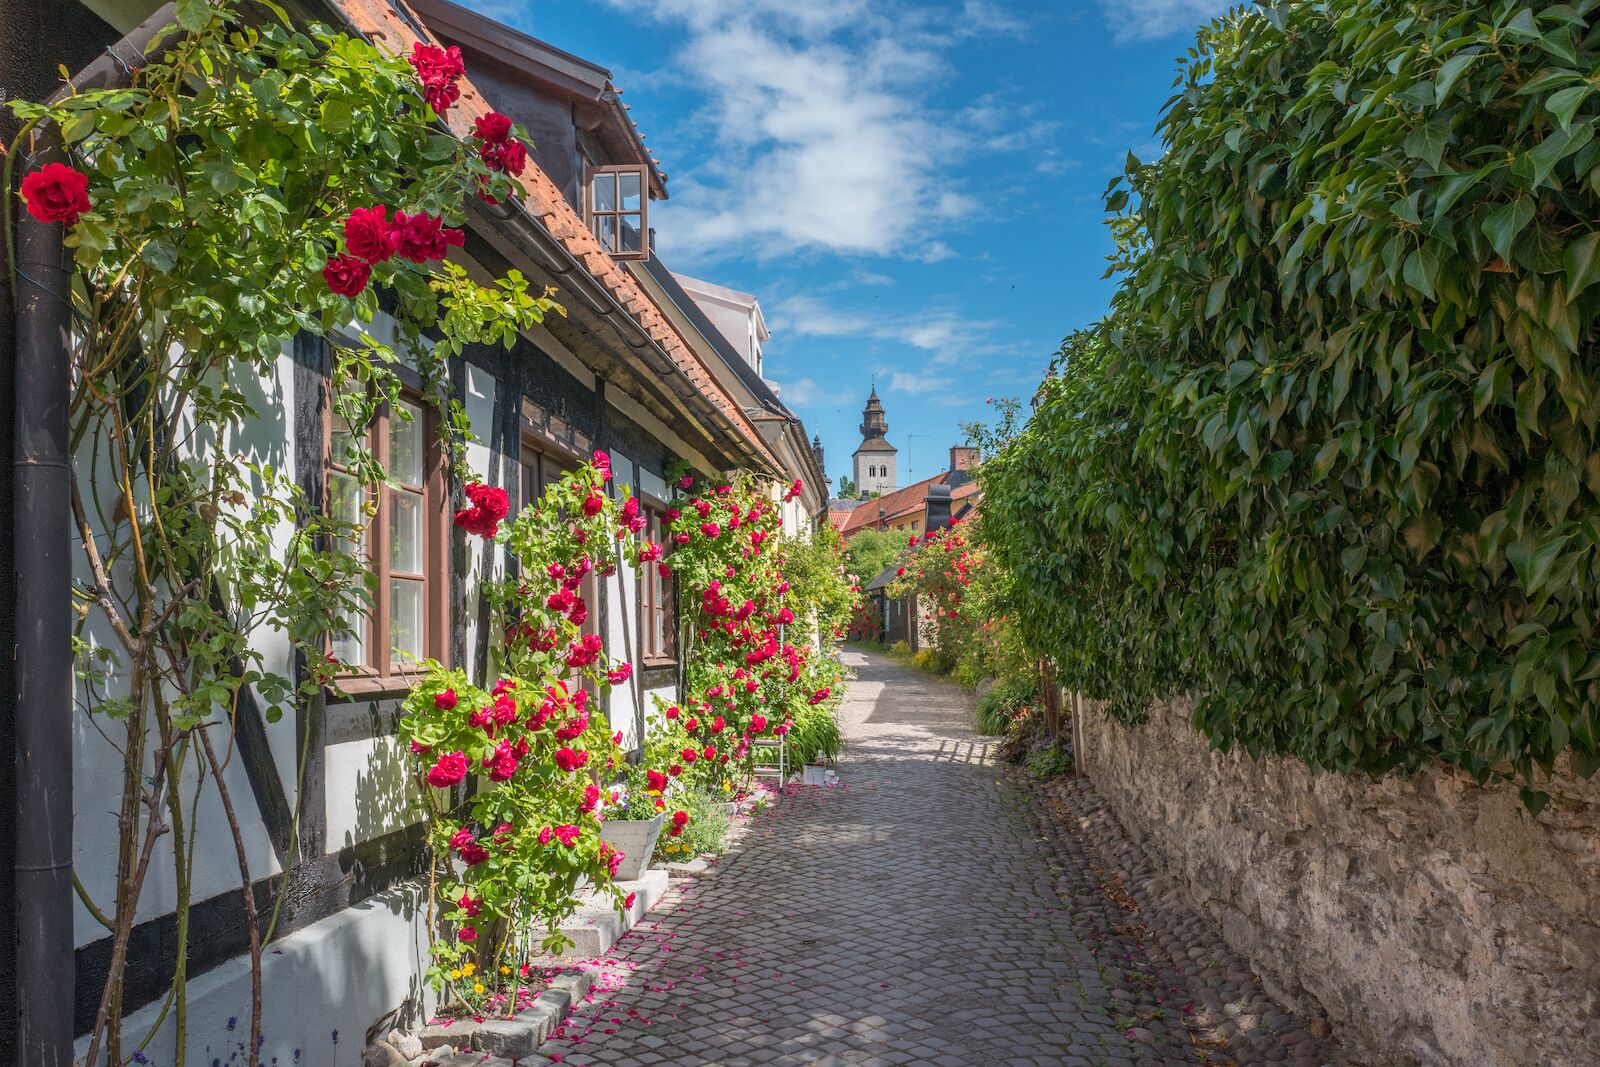 Hanseatic Town of Visby, Sweden, Luxembourg town one of the happiest countries in the world